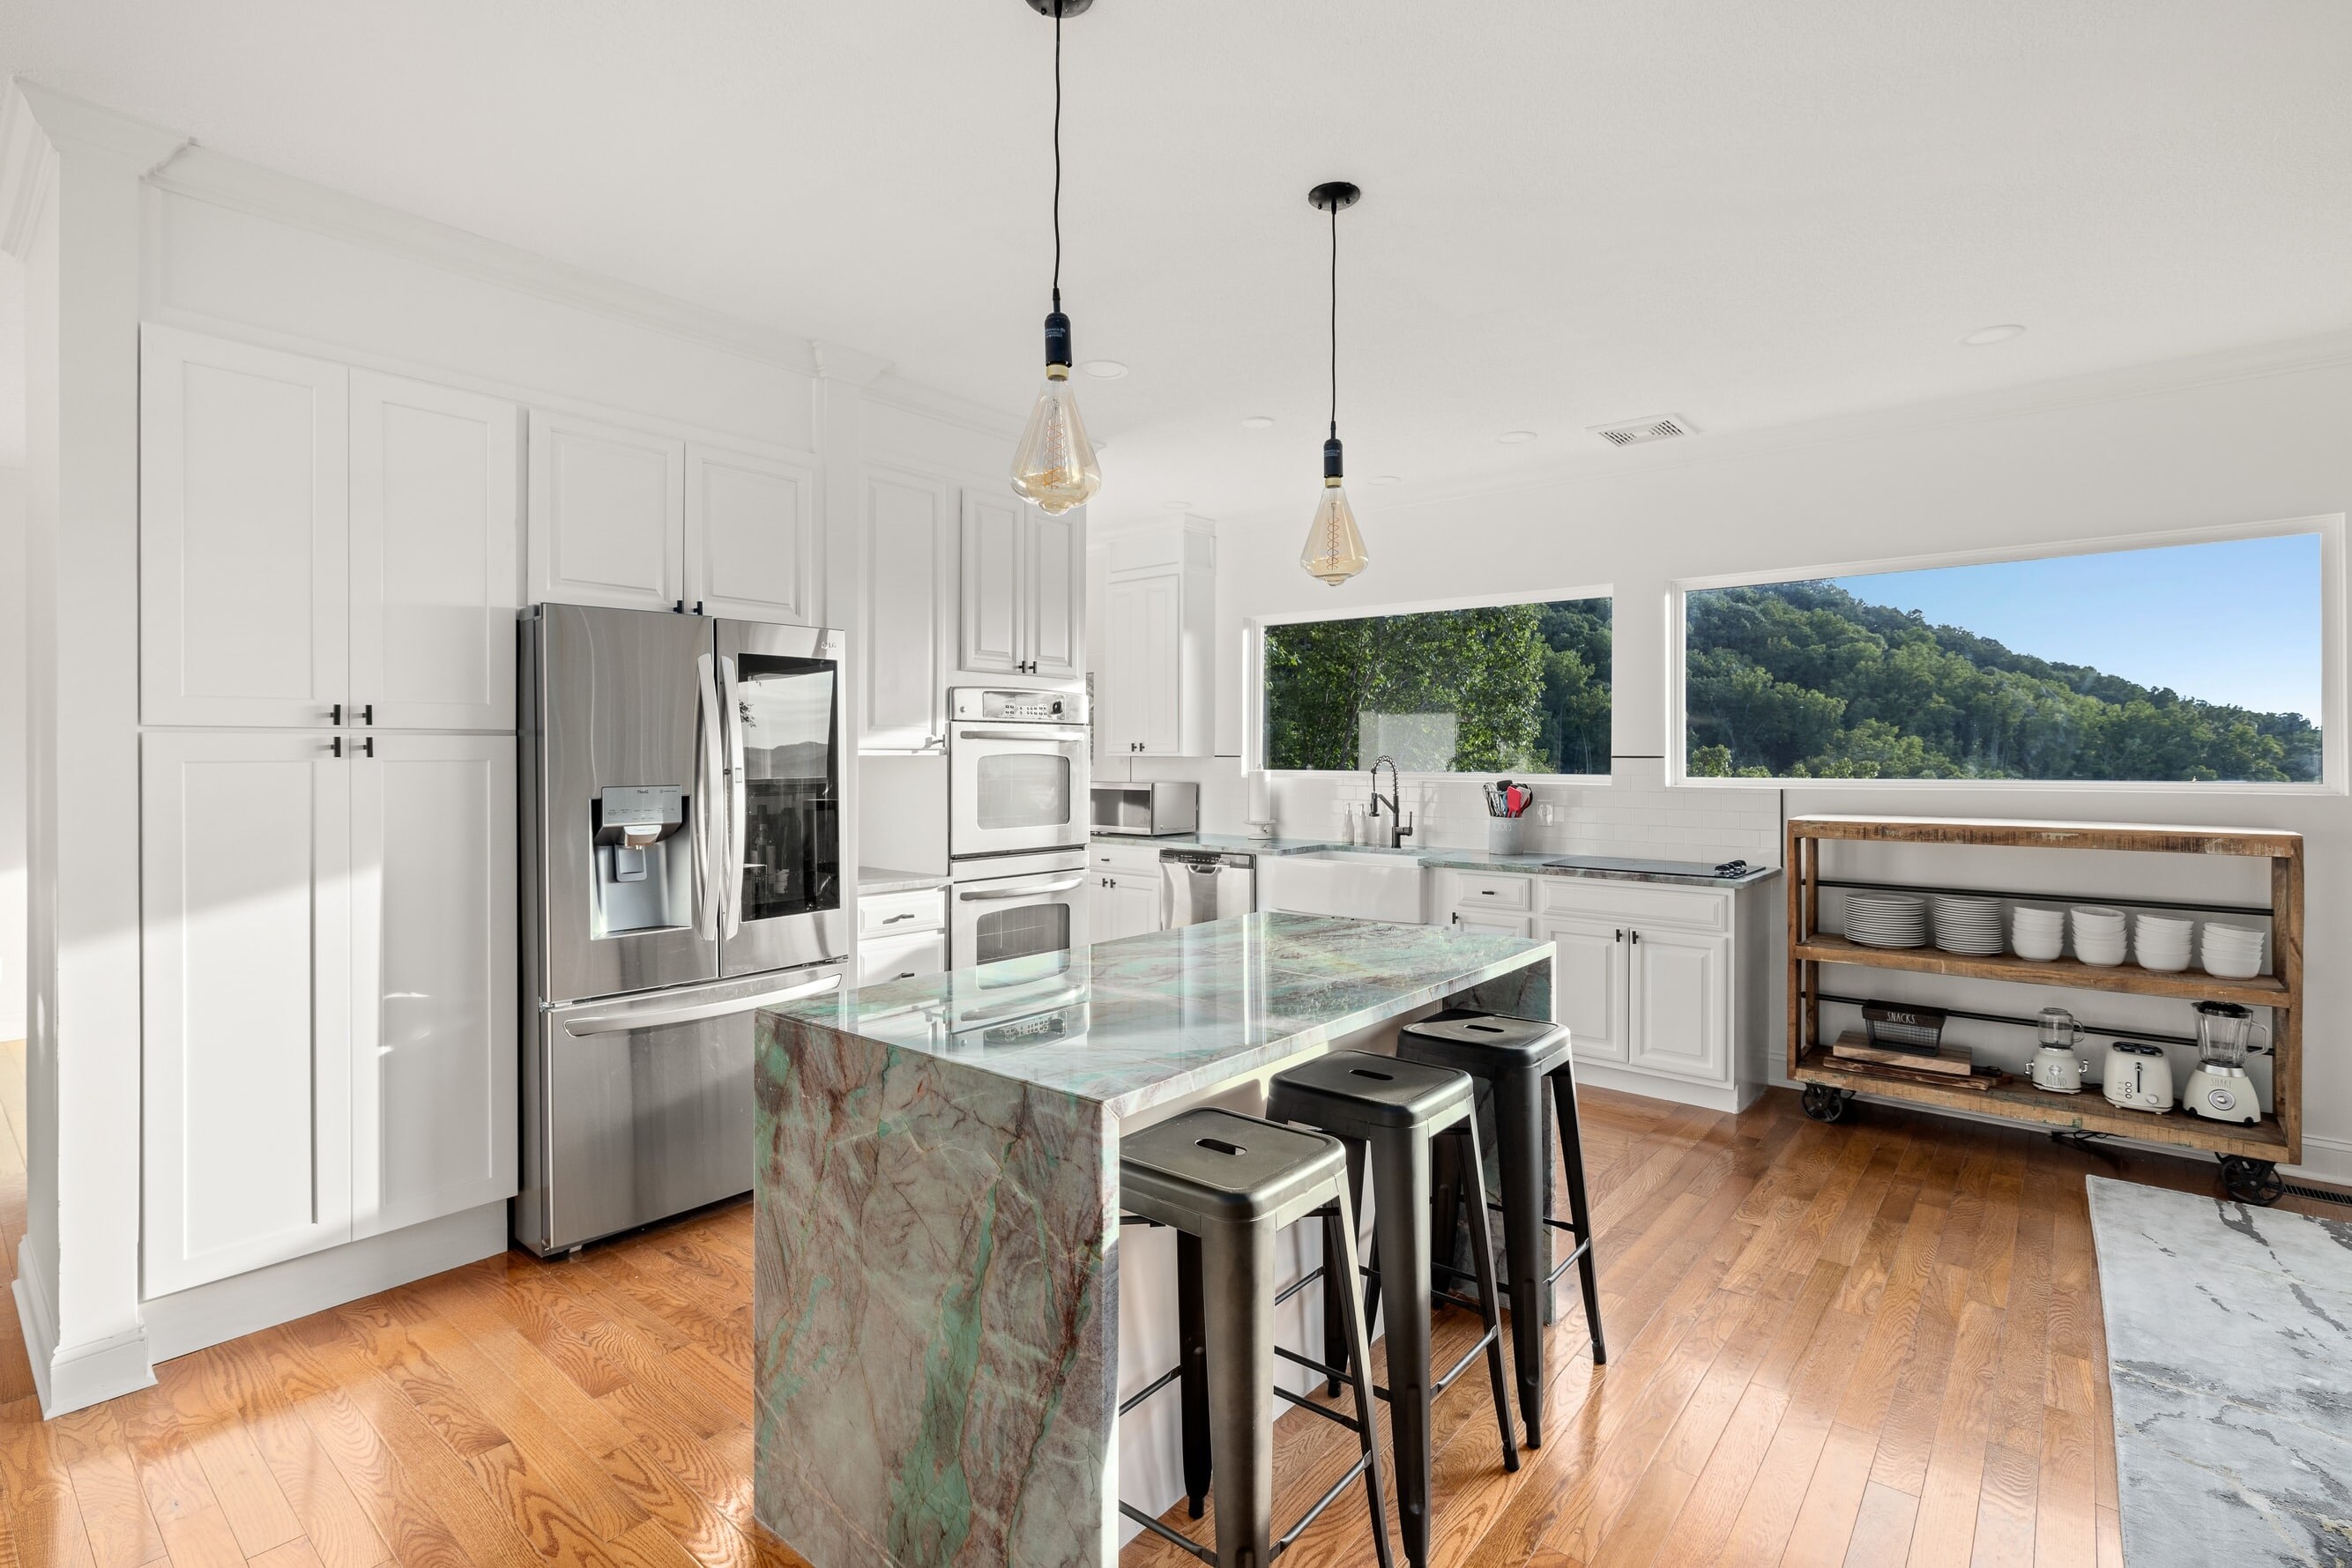 Fully-equipped kitchen with modern appliances and barstool seating at the island counter.